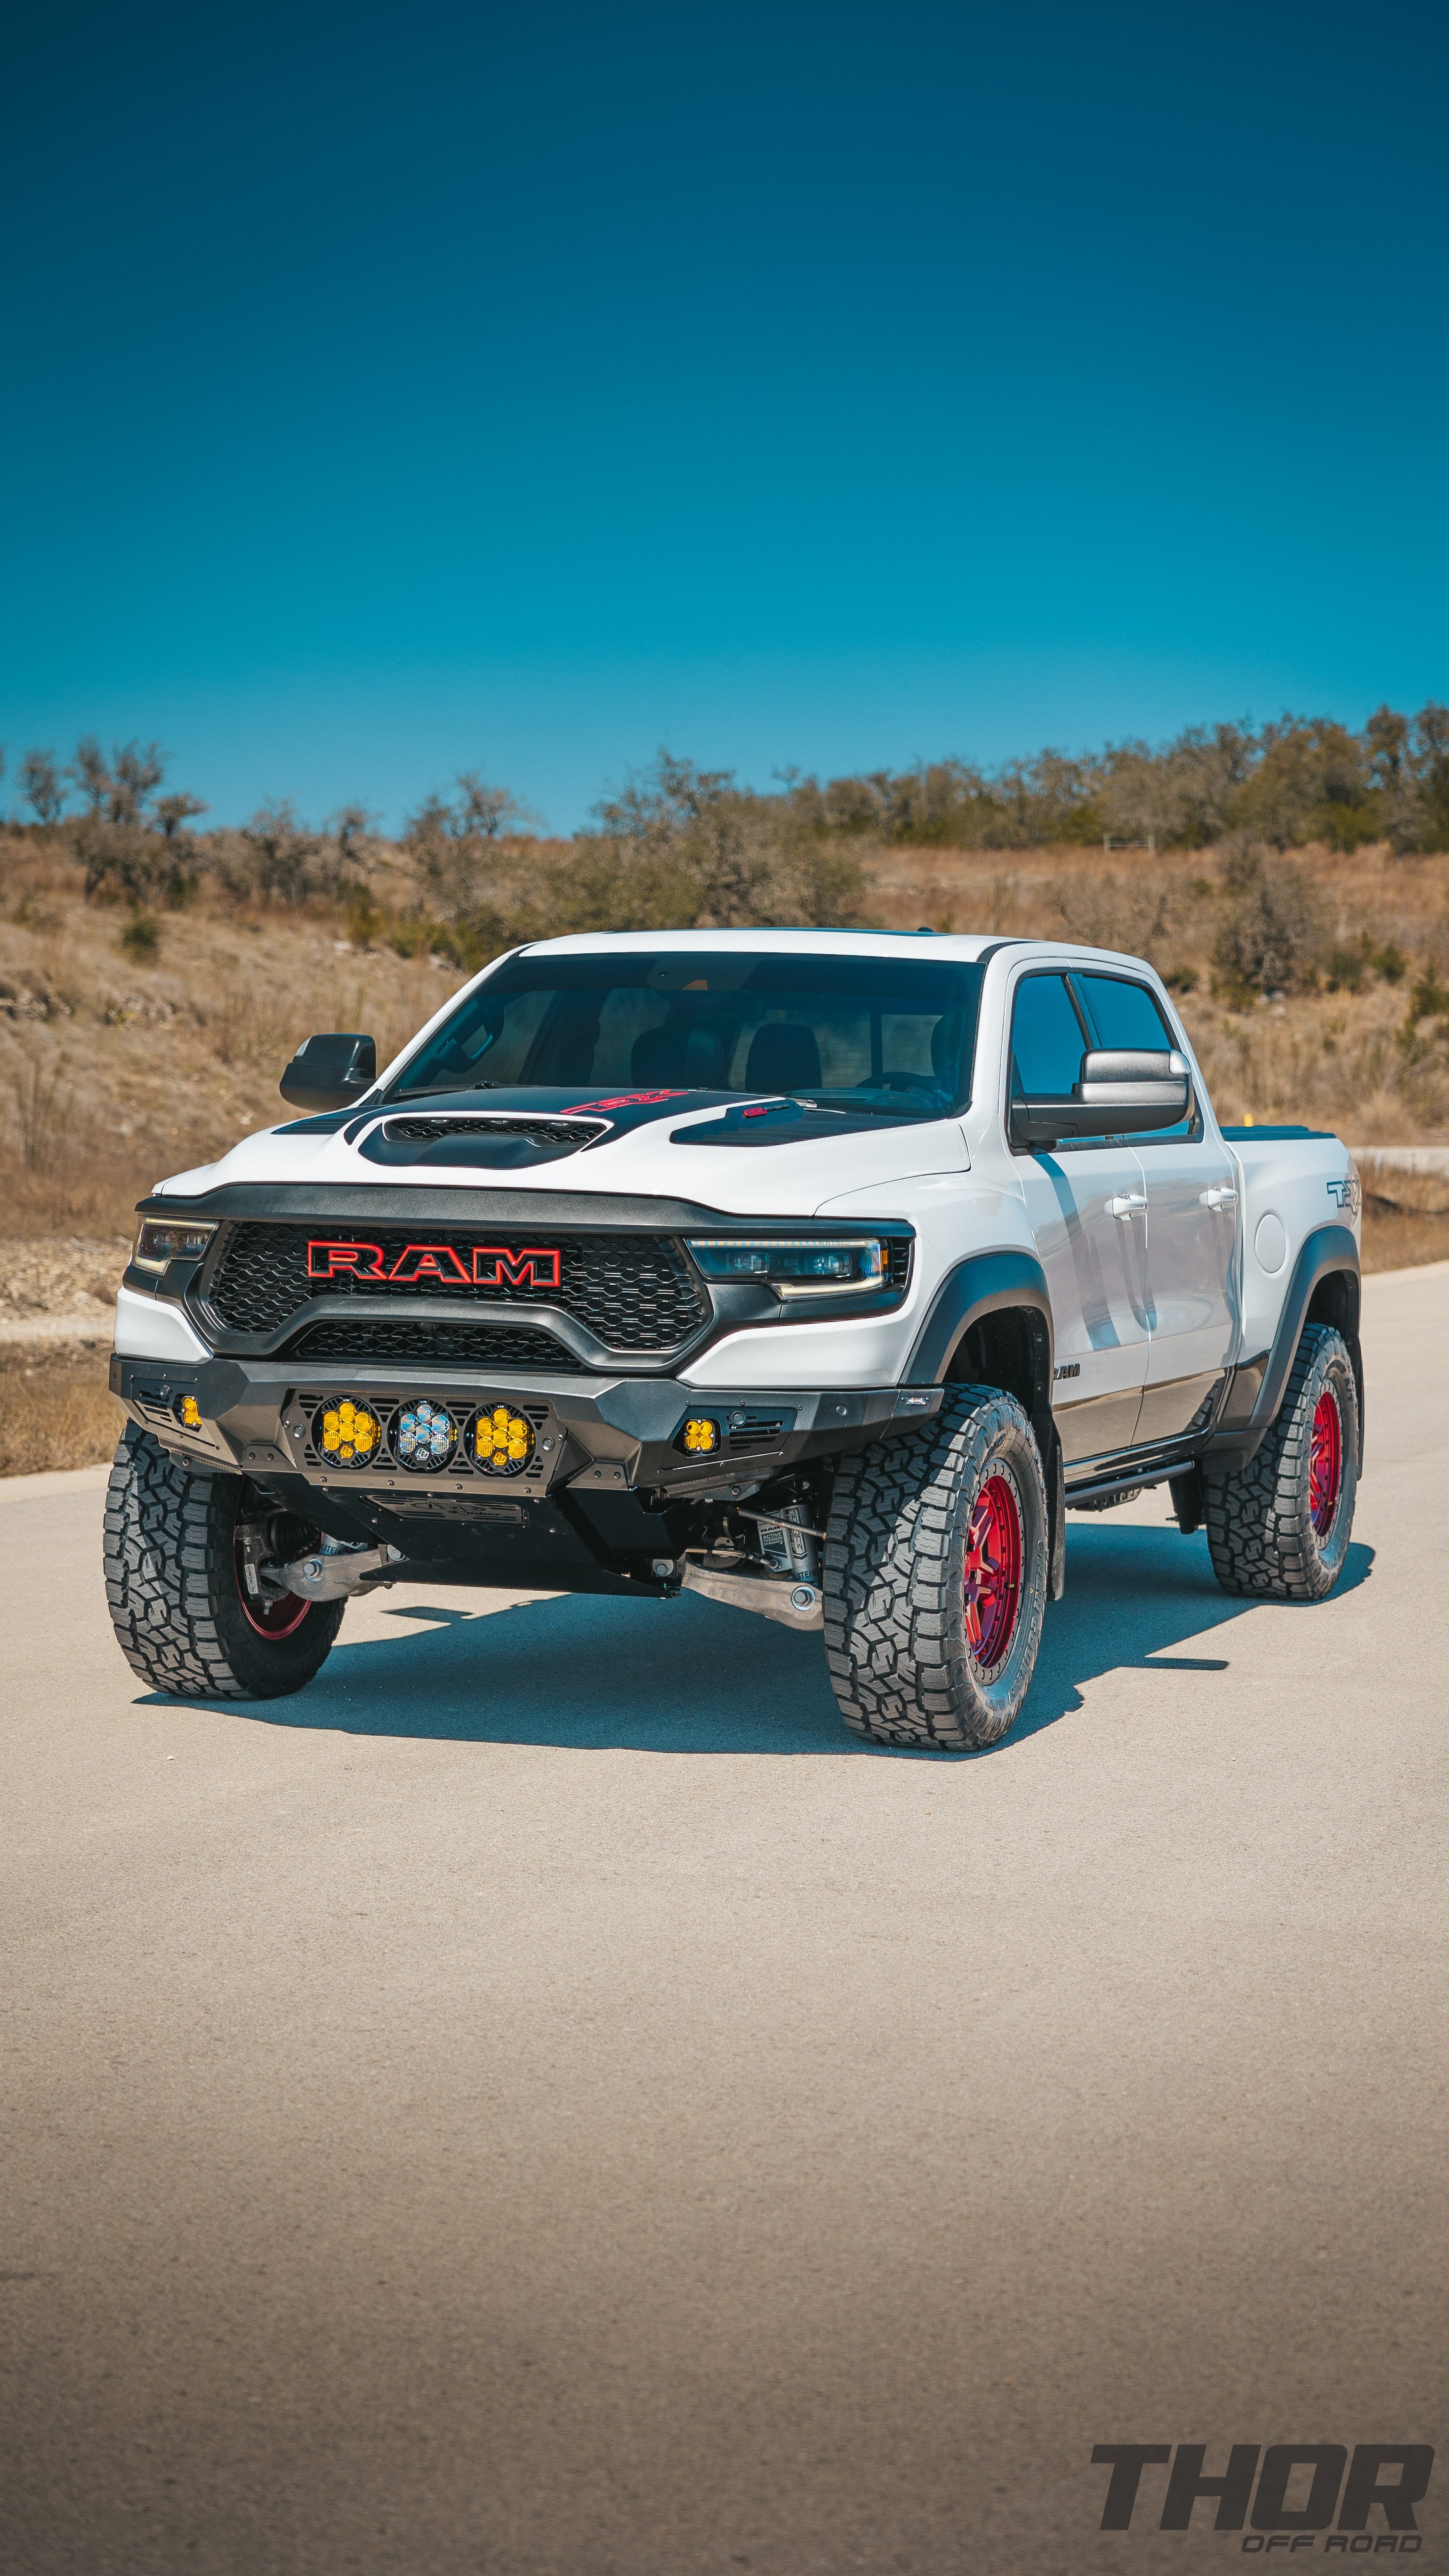 2022 RAM 1500 TRX in White with AFE Leveling Kit, 20x9" Black Rhino Reno Candy Red Wheels, 35x12.50R20 Toyo AT III, ADD Front and Rear Bumpers, Baja Design LP6 Center Lights, Baja Design Squadron Front and Rear Lights, Retrax Pro MX Bed Cover, Baja Design Rock Lighting